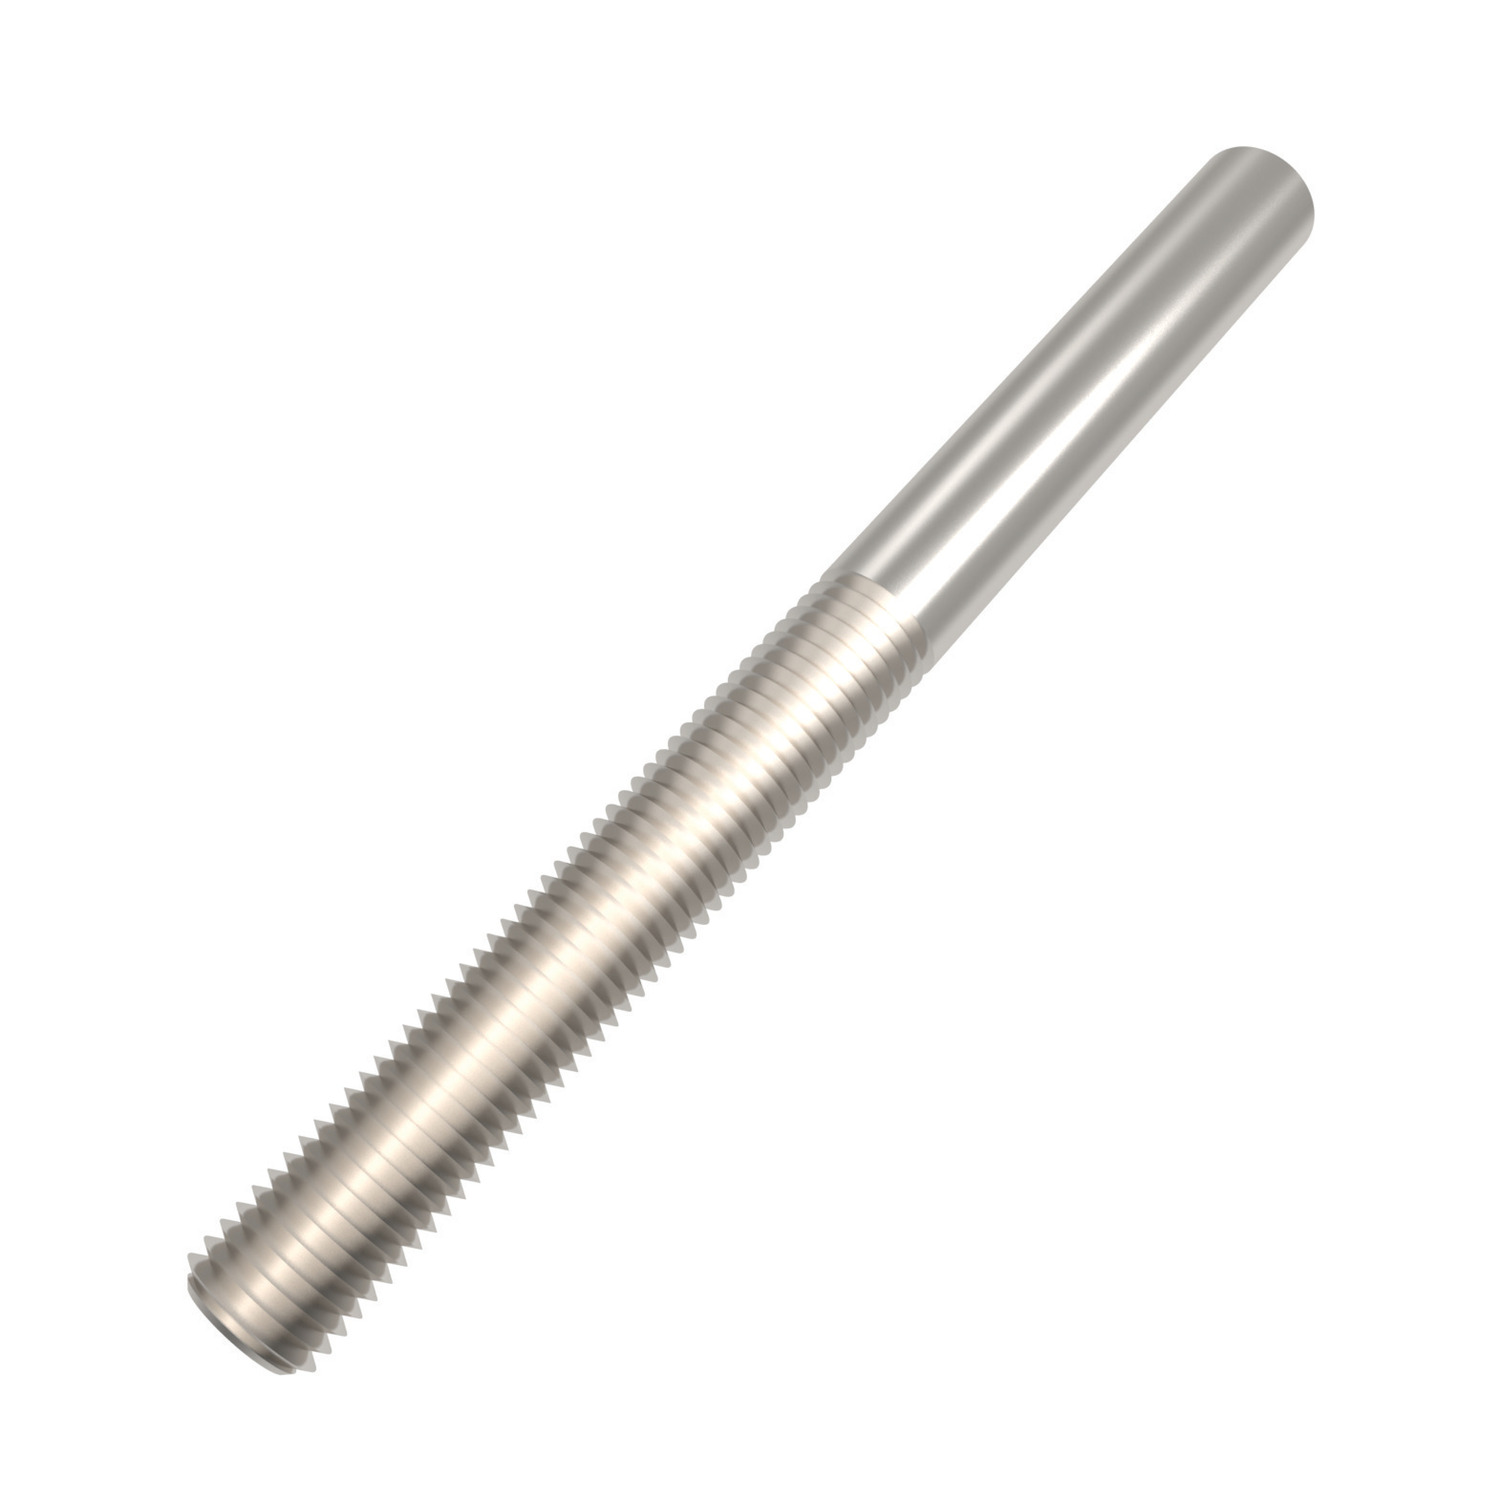 R3868.L012-A4 Welding Studs LH M12 A4 s/s Not to be used for lifting unless SWL marked.